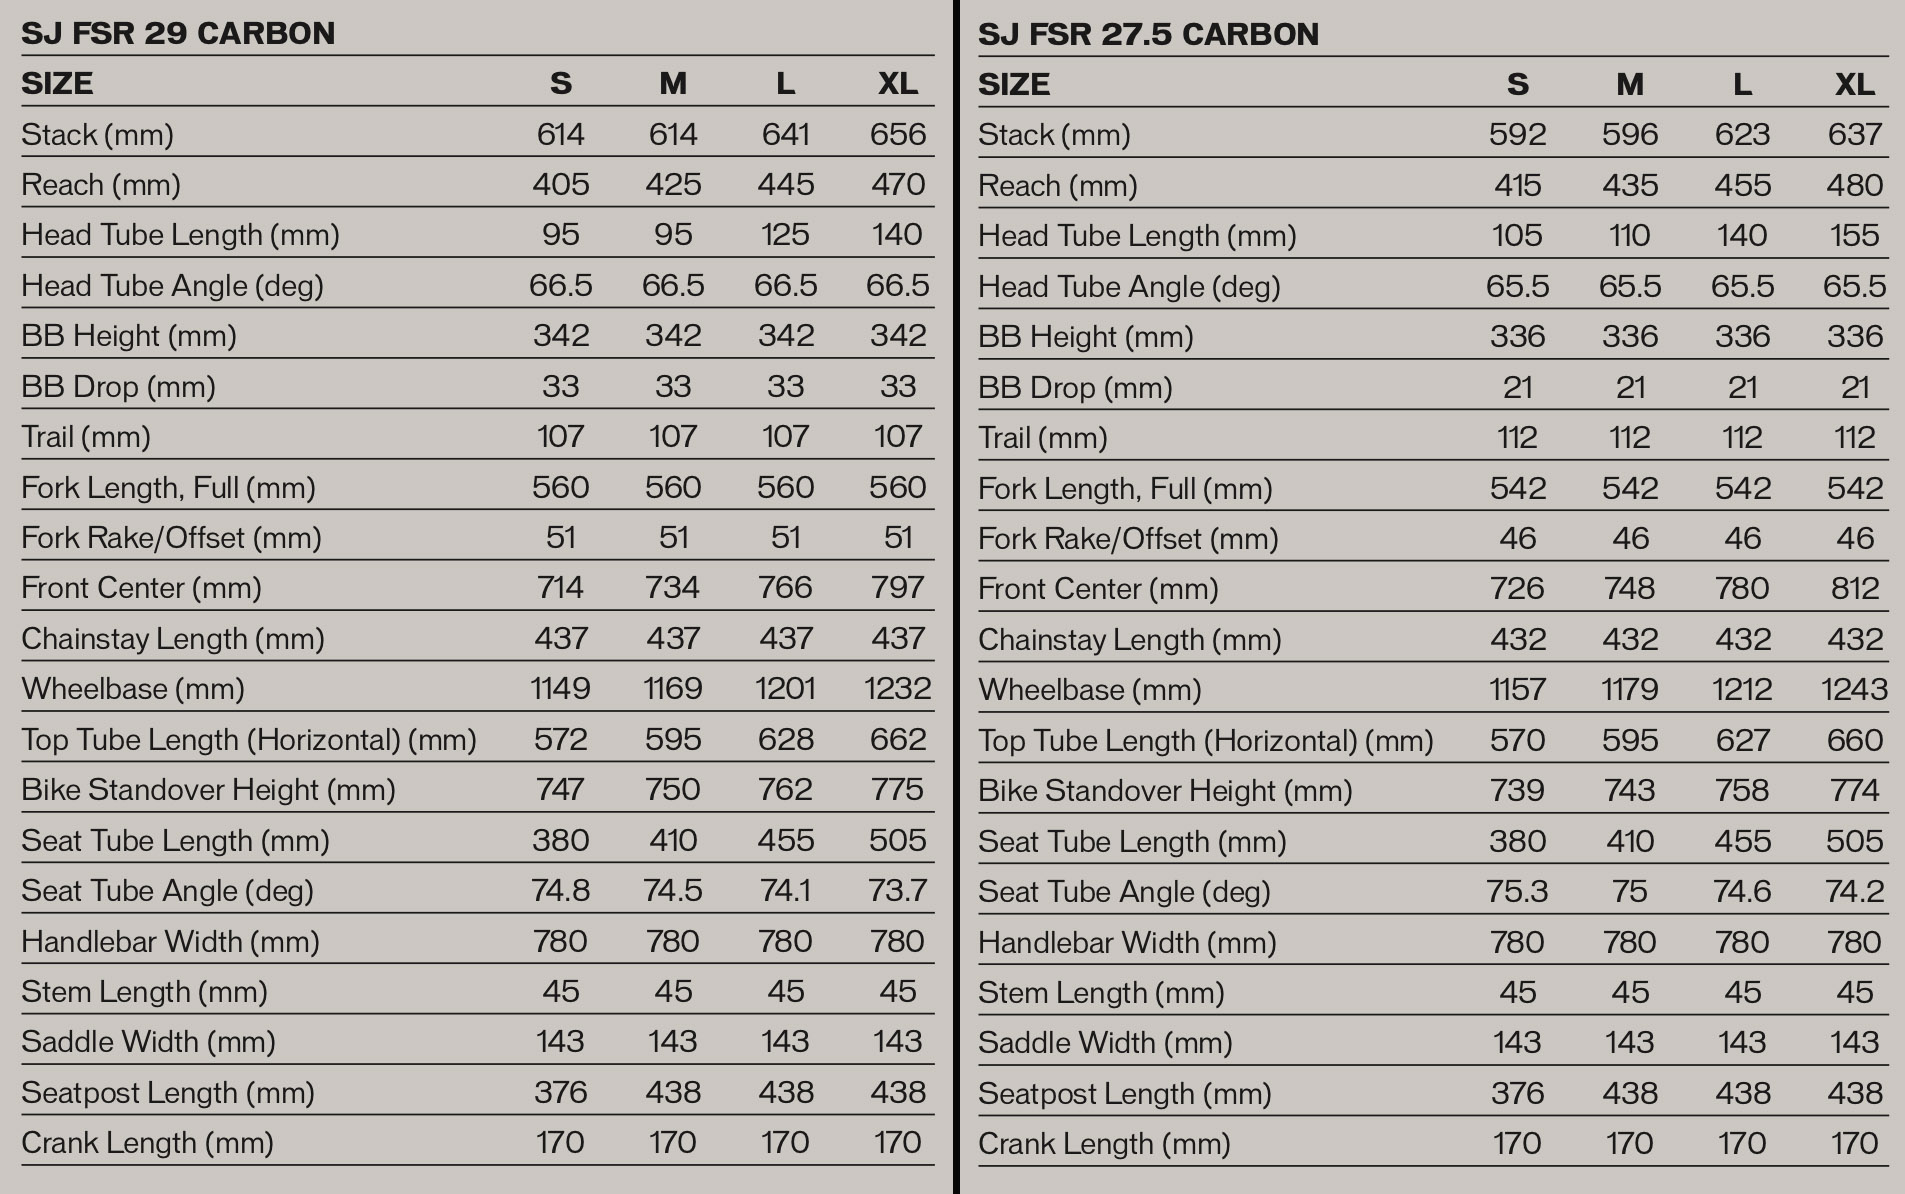 Geo stats for the Stumpjumper Comp Carbon - 29 &amp; 275